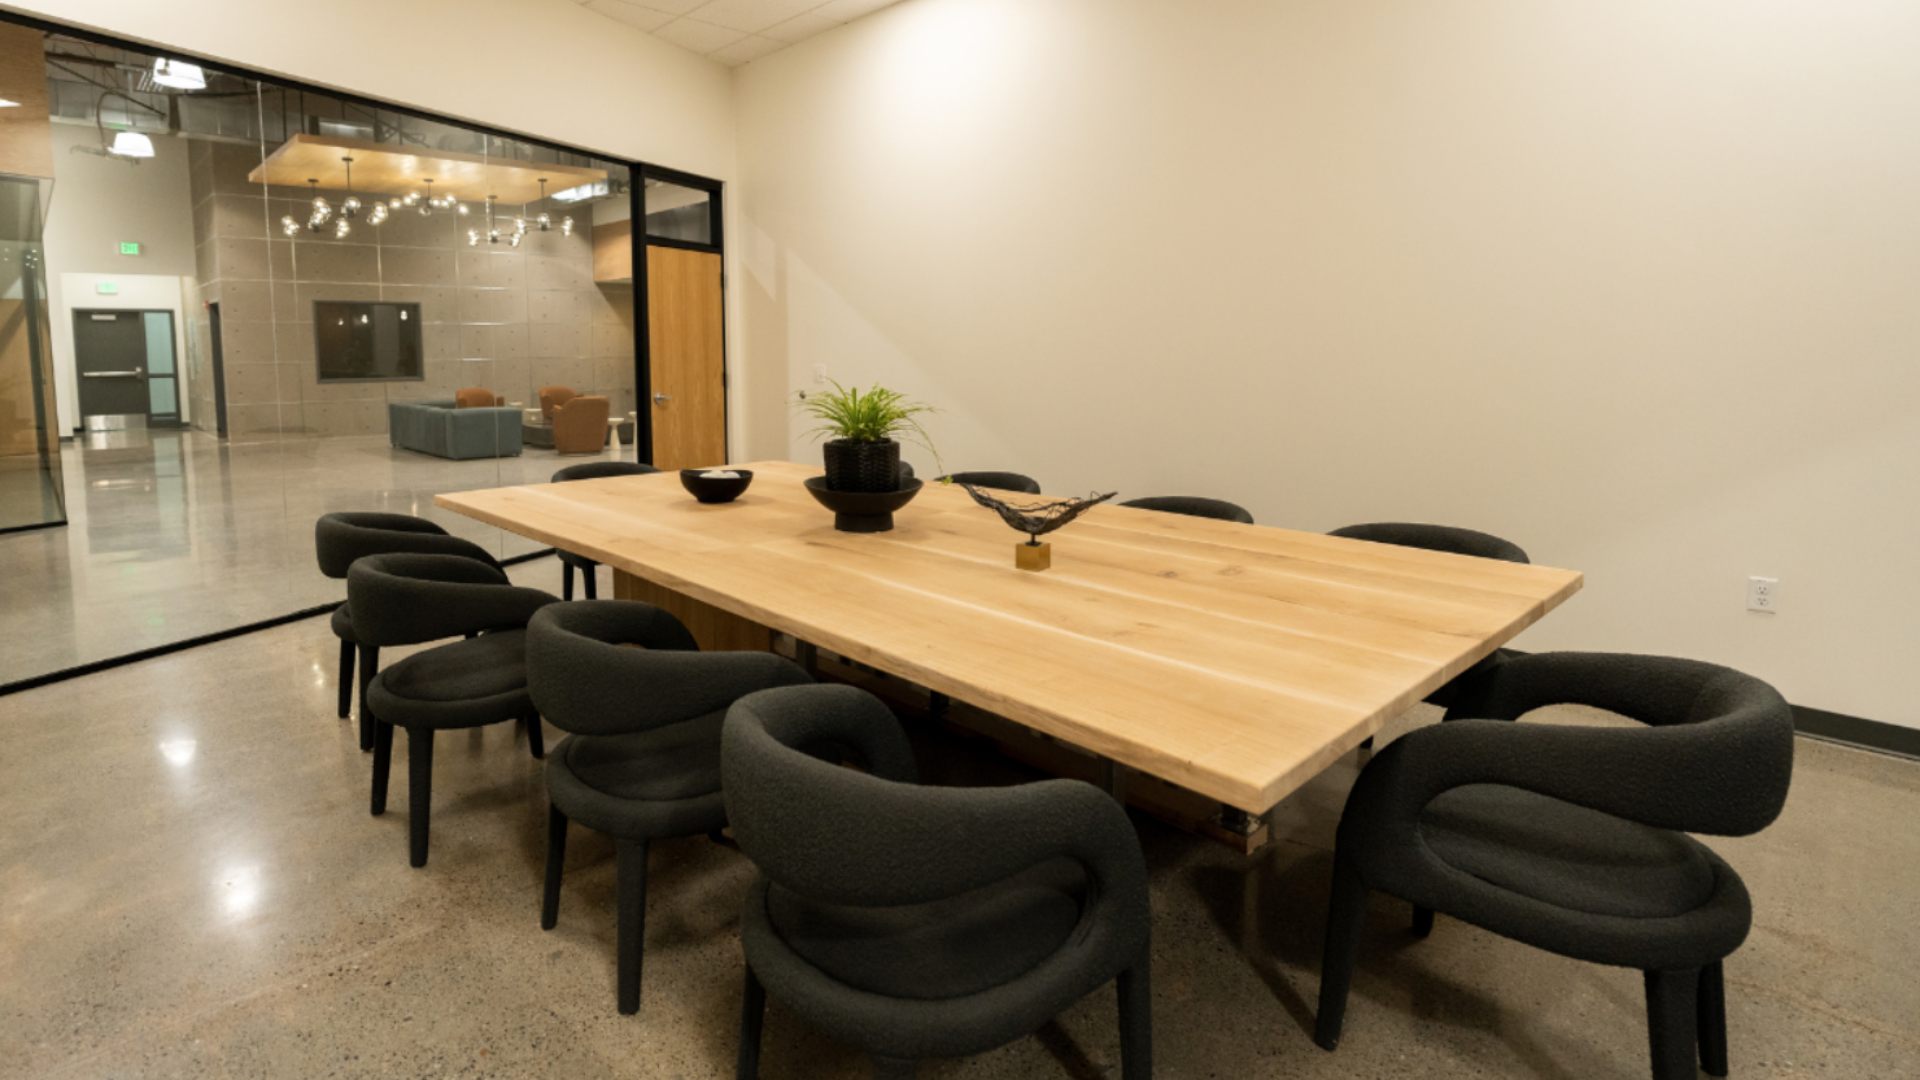 Conference room with long wooden table and black chairs